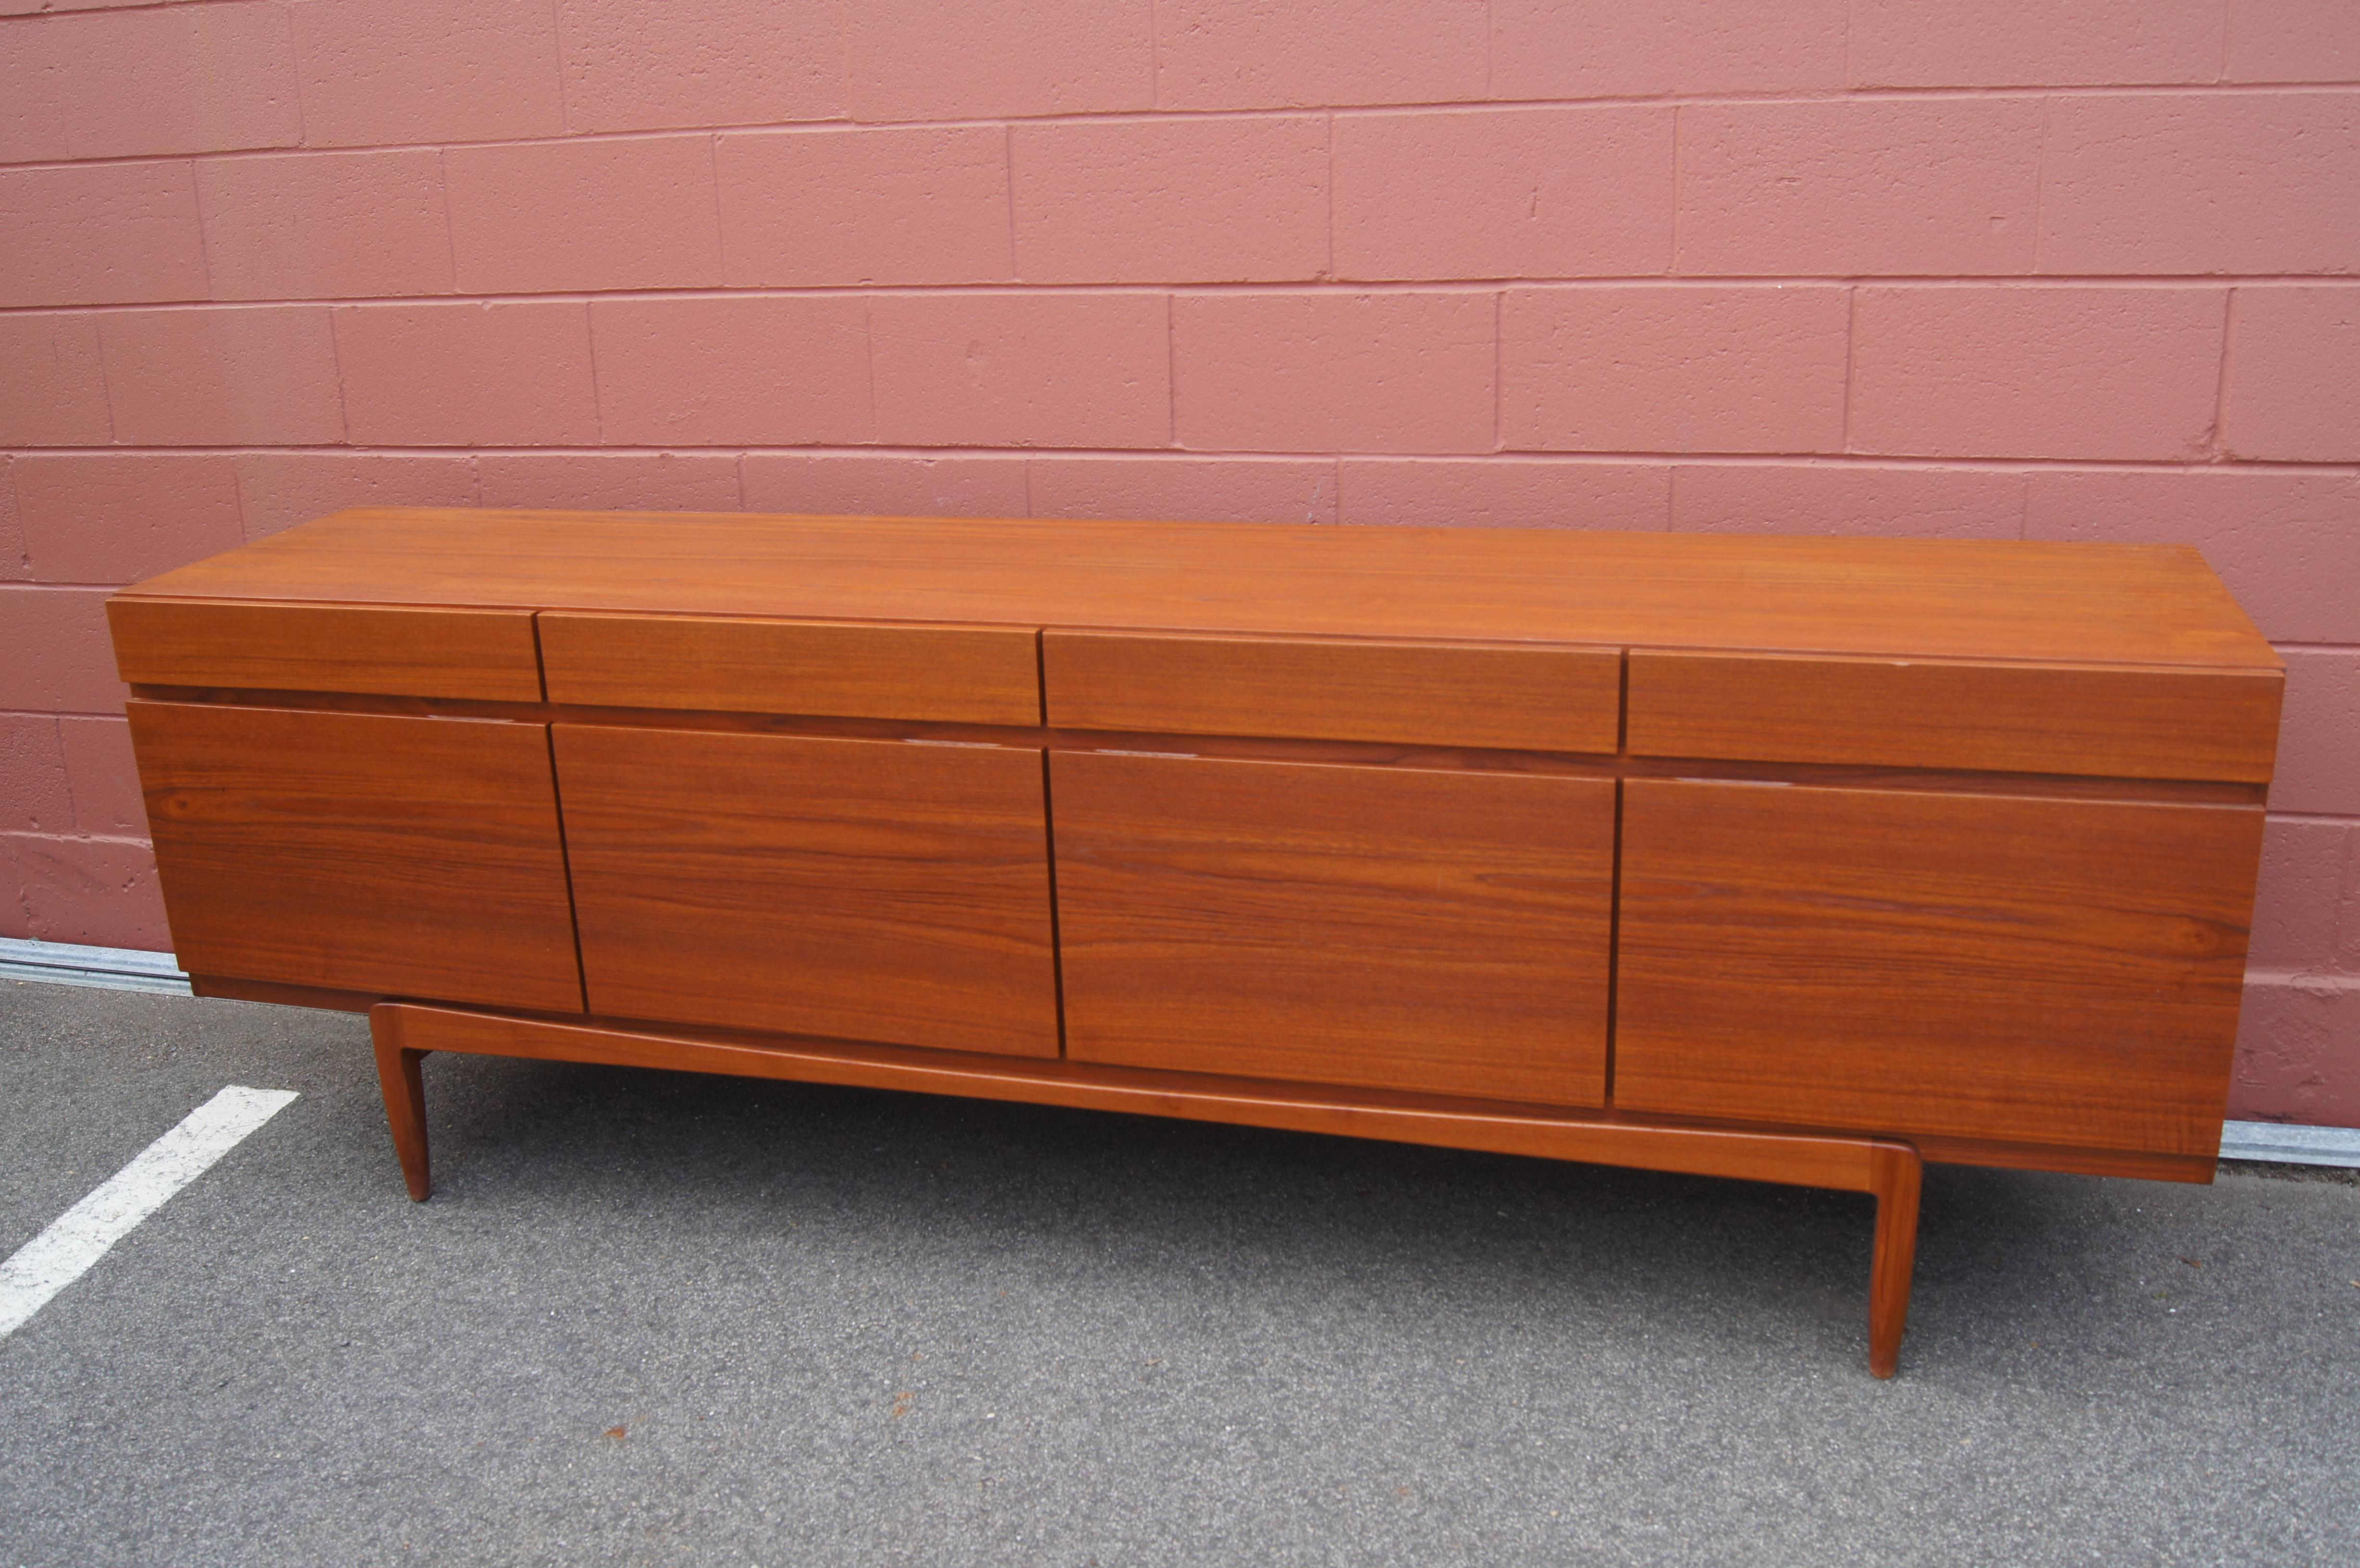 This handsome mid-century sideboard, model 66 by Ib Kofod-Larsen for Faarup, is solidly constructed, with minimal, clean lines. Set on a raised base, the teak case provides ample storage. Four roomy drawers are aligned above four doors; five